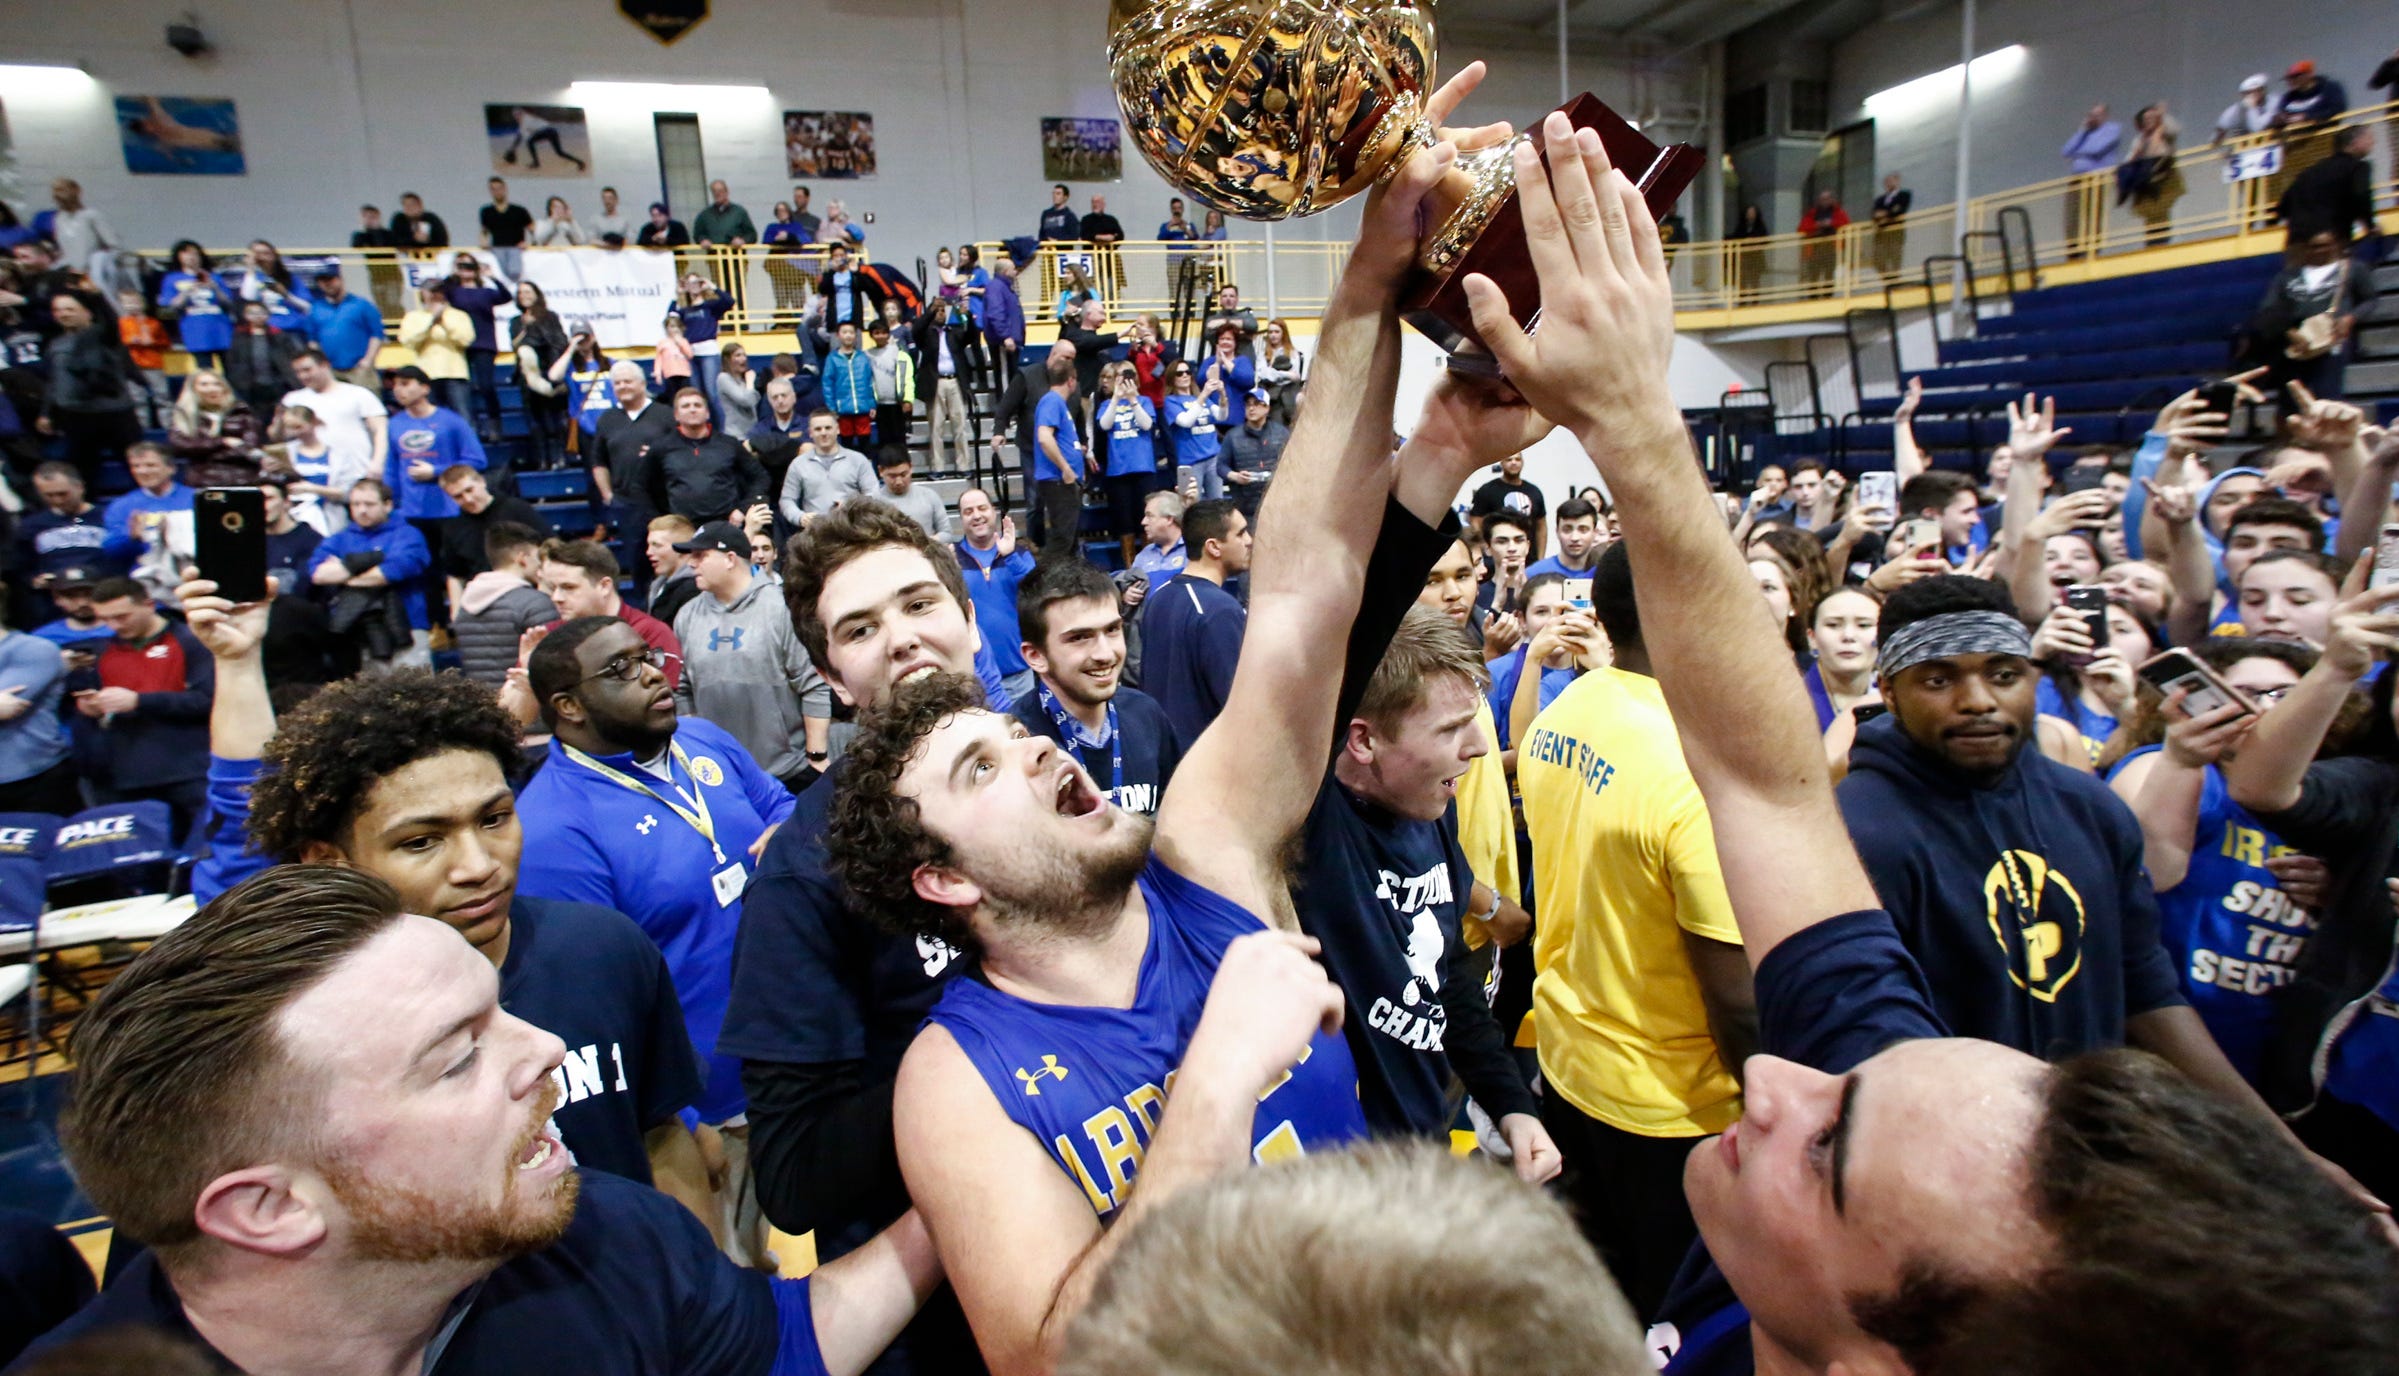 Boys basketball: 2019 Section 1 tournament seeds, schedule announced